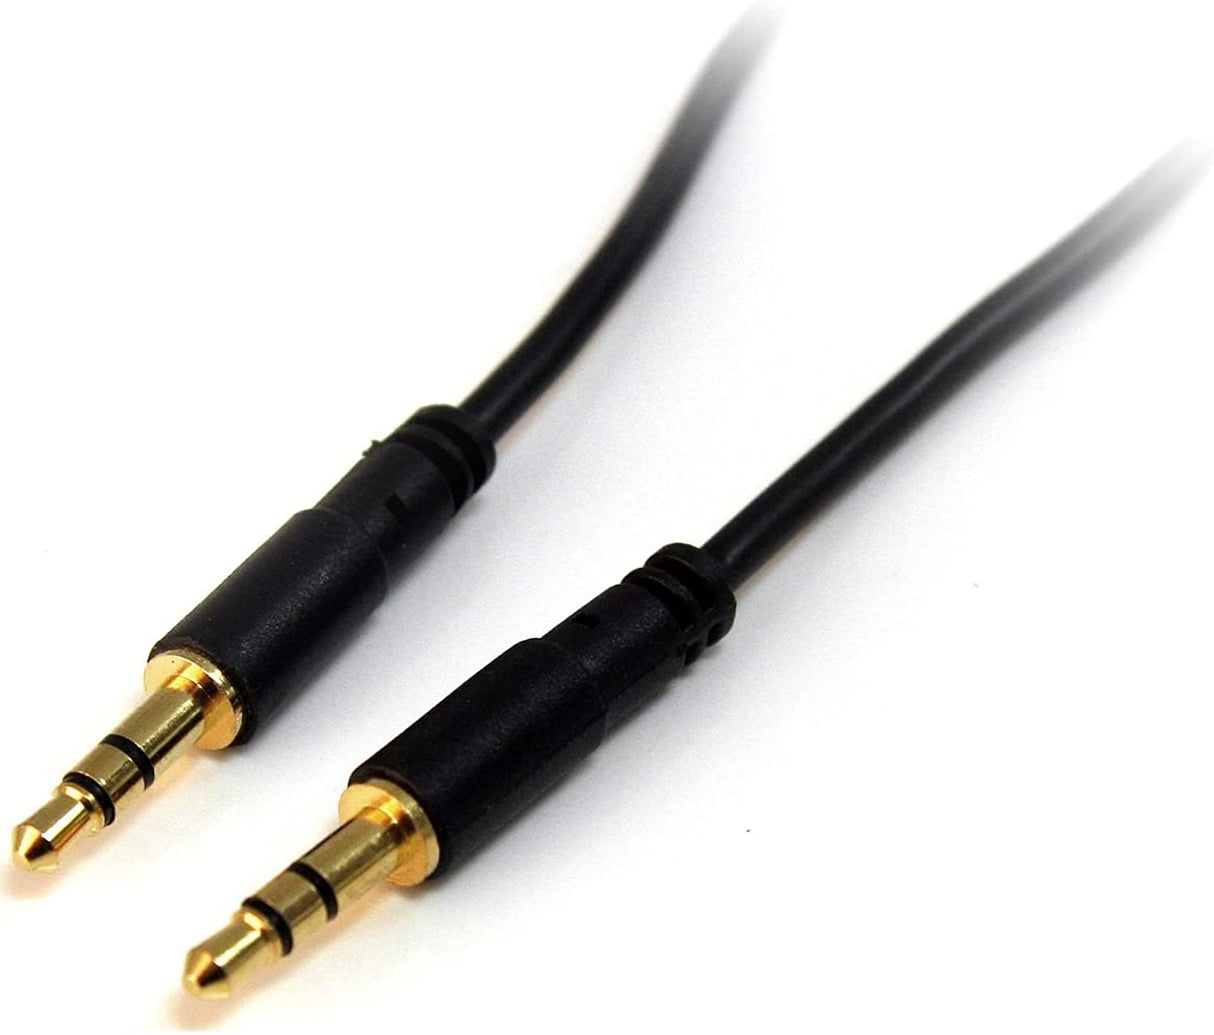 StarTech.com 3.5mm Audio Cable - 10 ft - Slim - M / M - AUX Cable - Male to Male Audio Cable - AUX Cord - Headphone Cable - Auxiliary Cable (MU10MMS), Black 10ft Straight Audio Cable